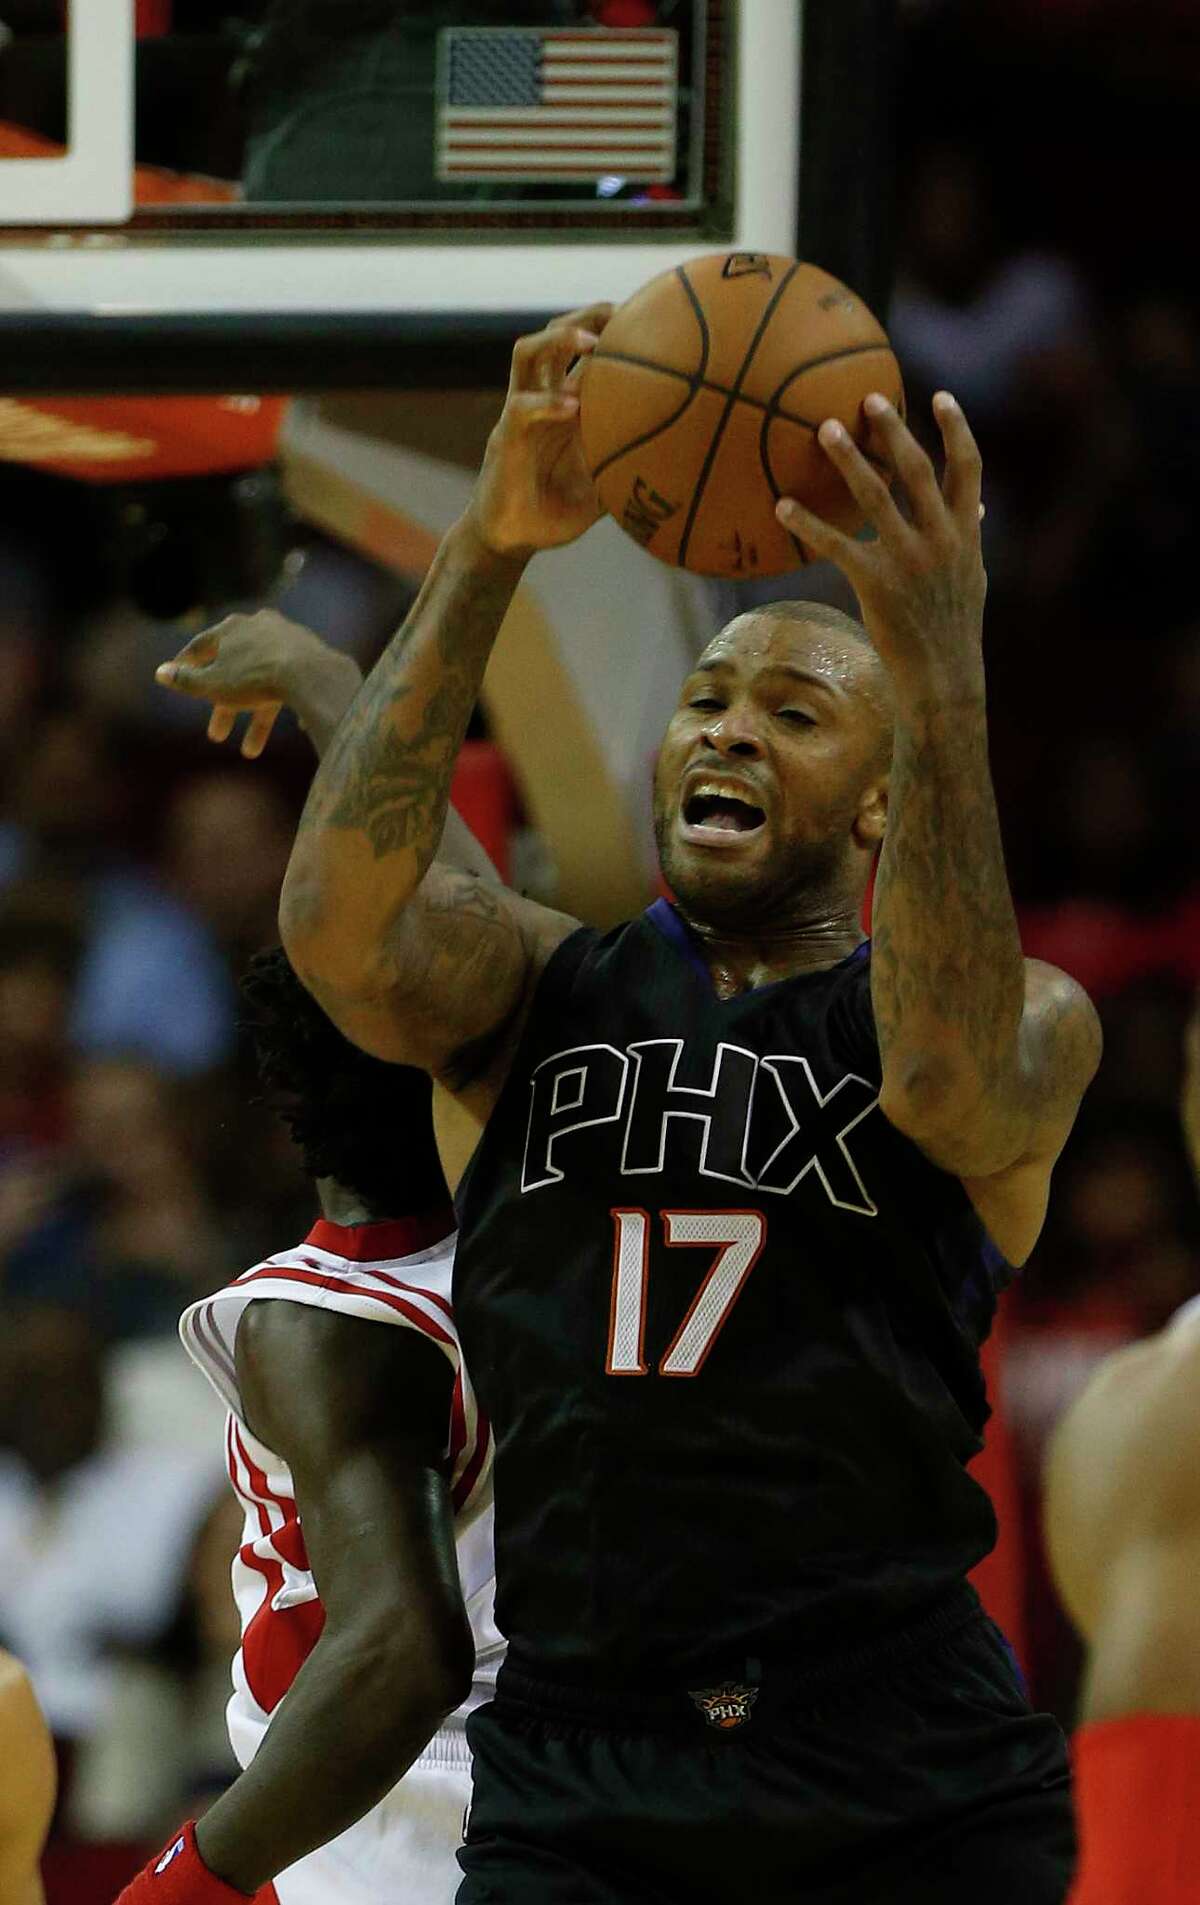 Phoenix Suns forward P.J. Tucker (17) grabs a rebound during the second half of an NBA basketball game at Toyota Center, Thursday, April 7, 2016, in Houston. Rockets lost to Phoenix 124-115. ( Karen Warren / Houston Chronicle )